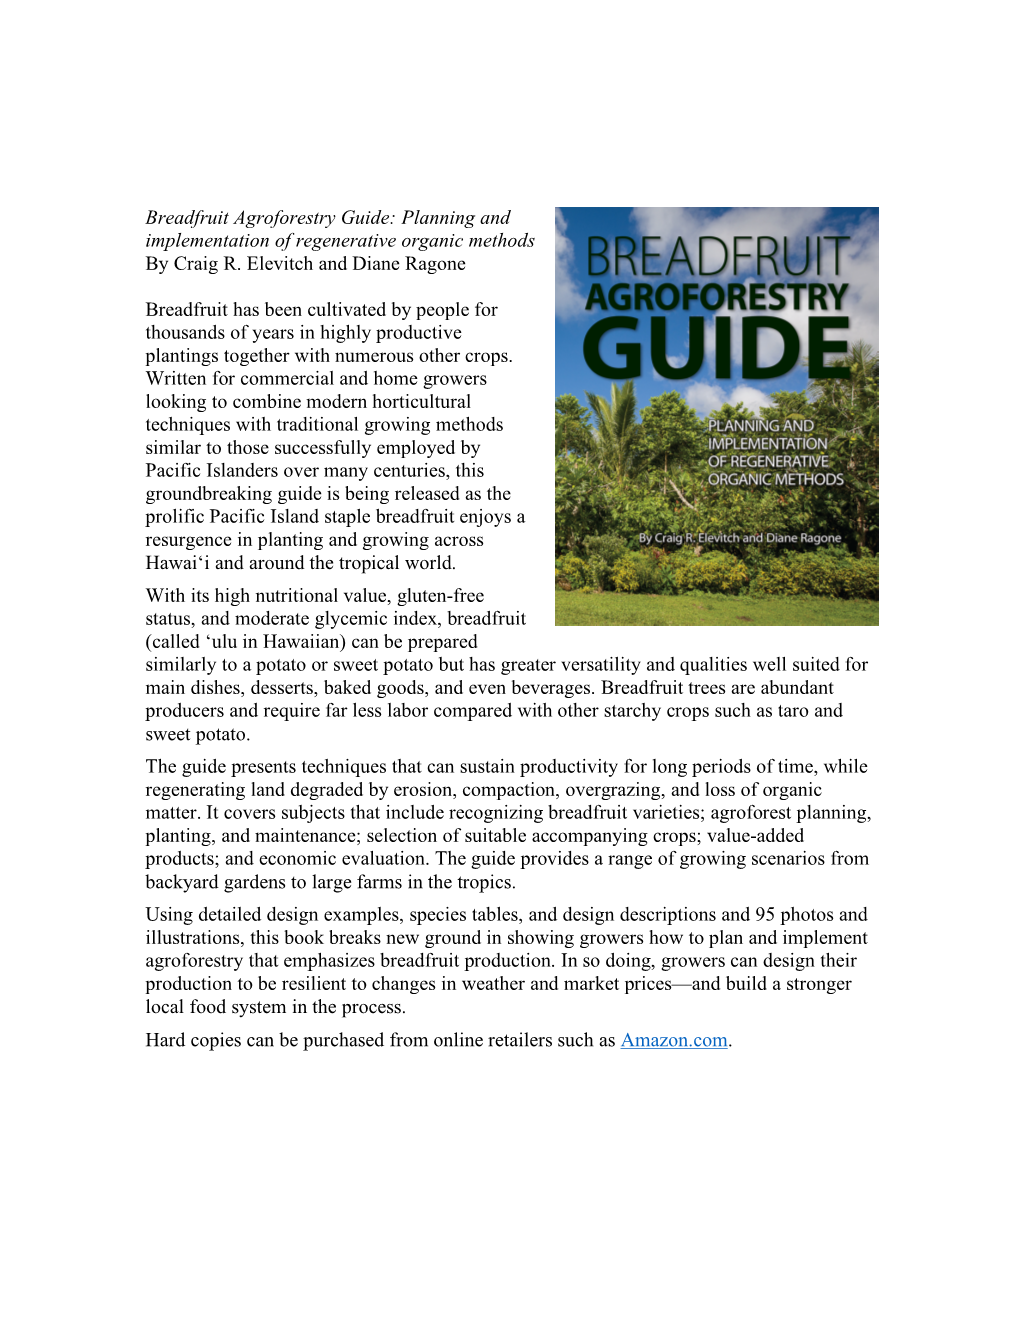 Breadfruit Agroforestry Guide: Planning and Implementaton for Regenerative Organic Methods